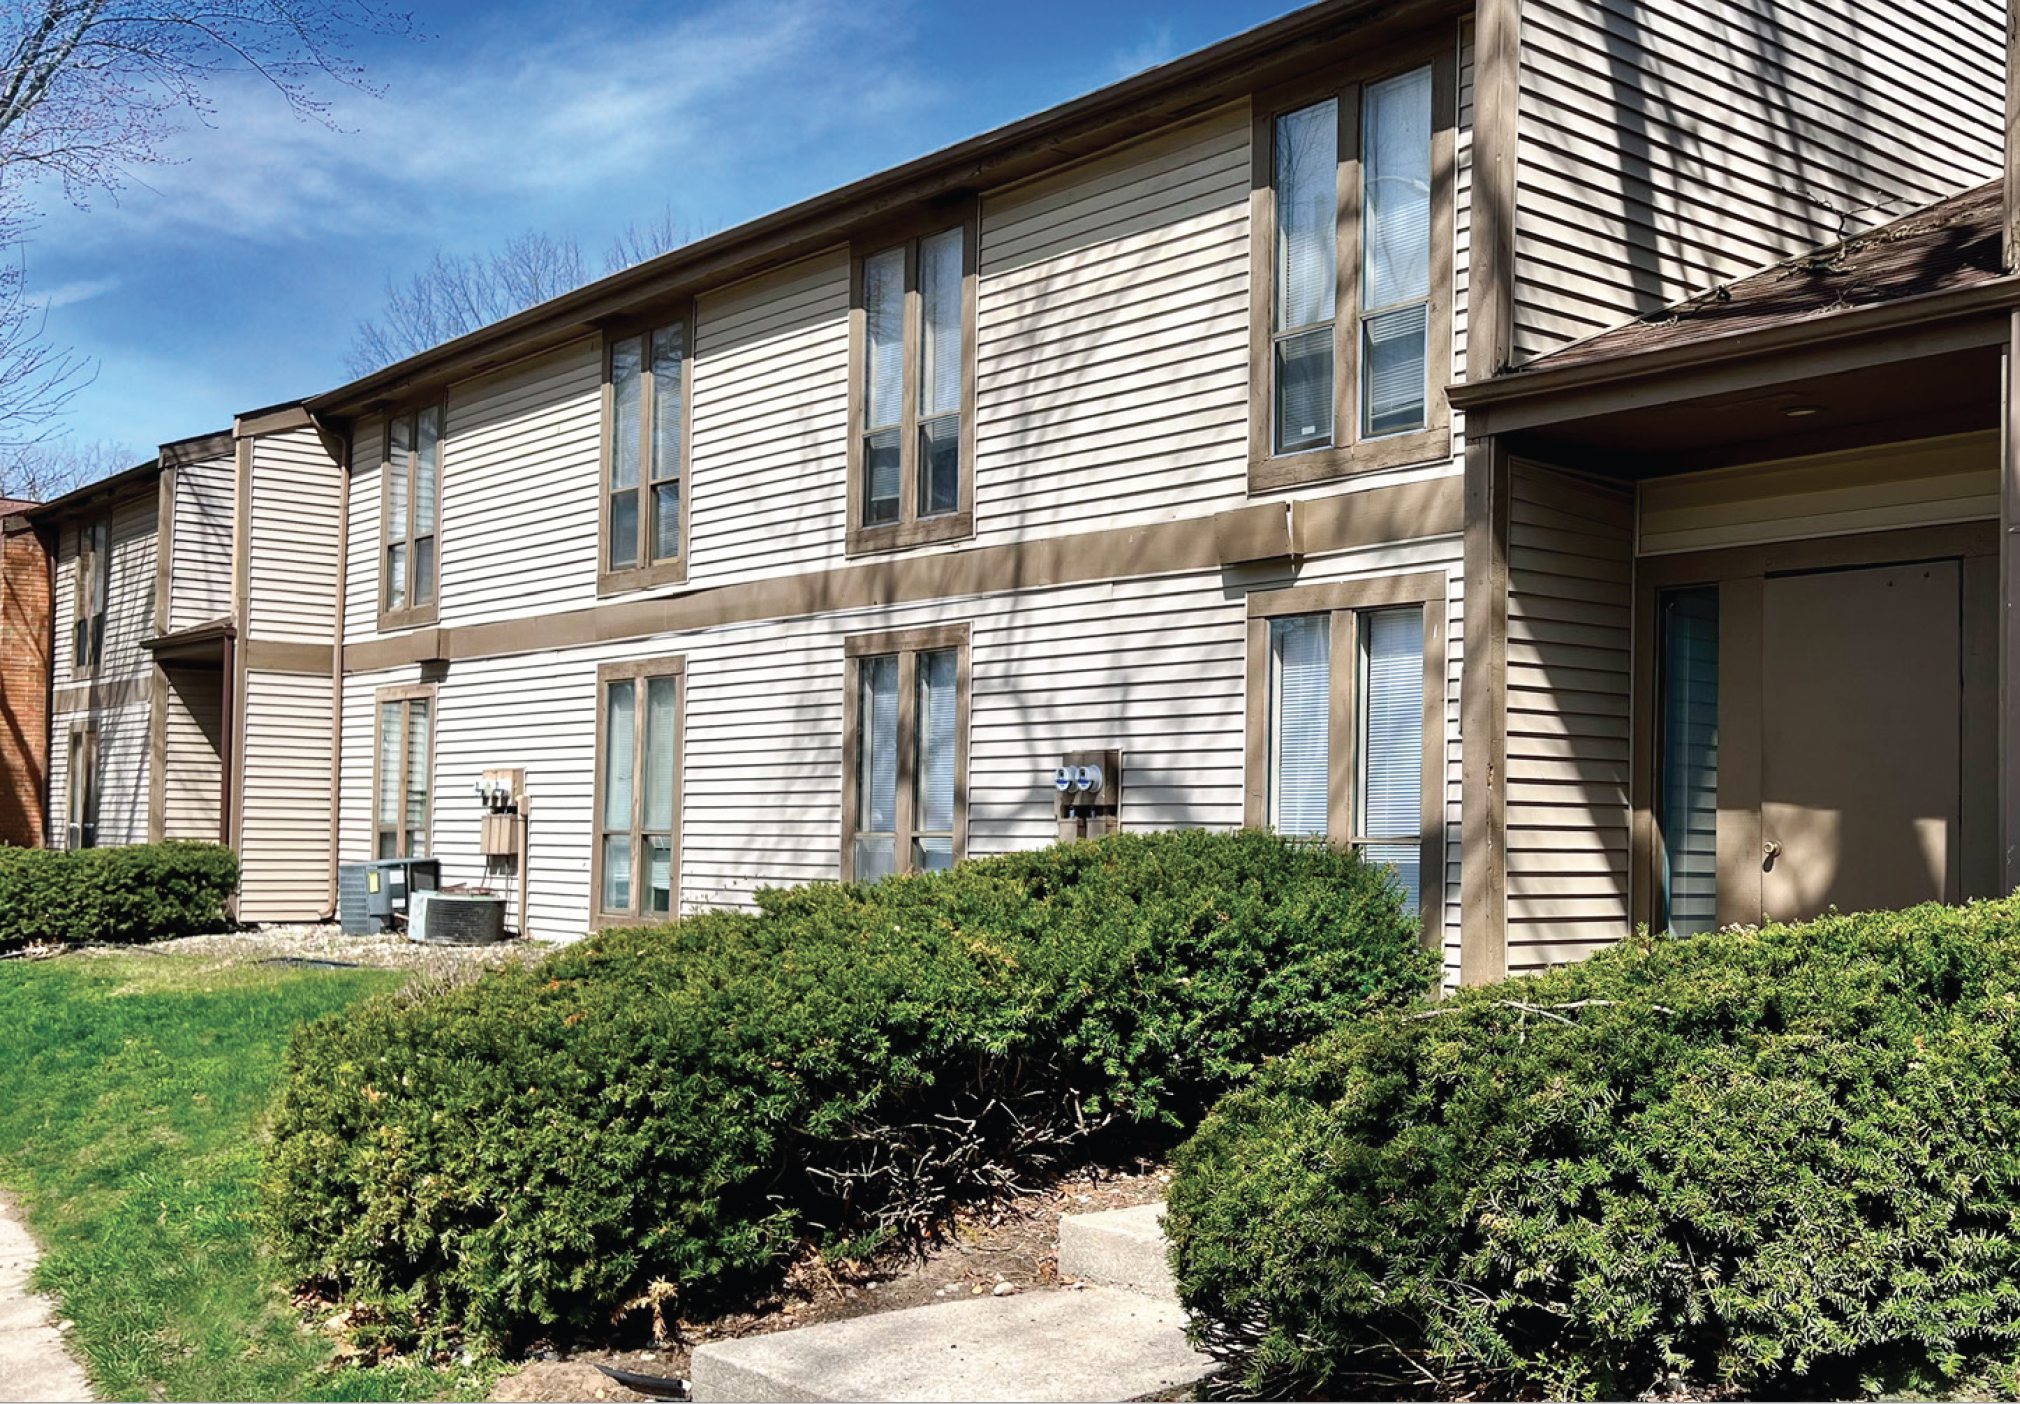 Cherry Tree Acquires Walnut Trails Apartments in Elkhart, Indiana for $23M